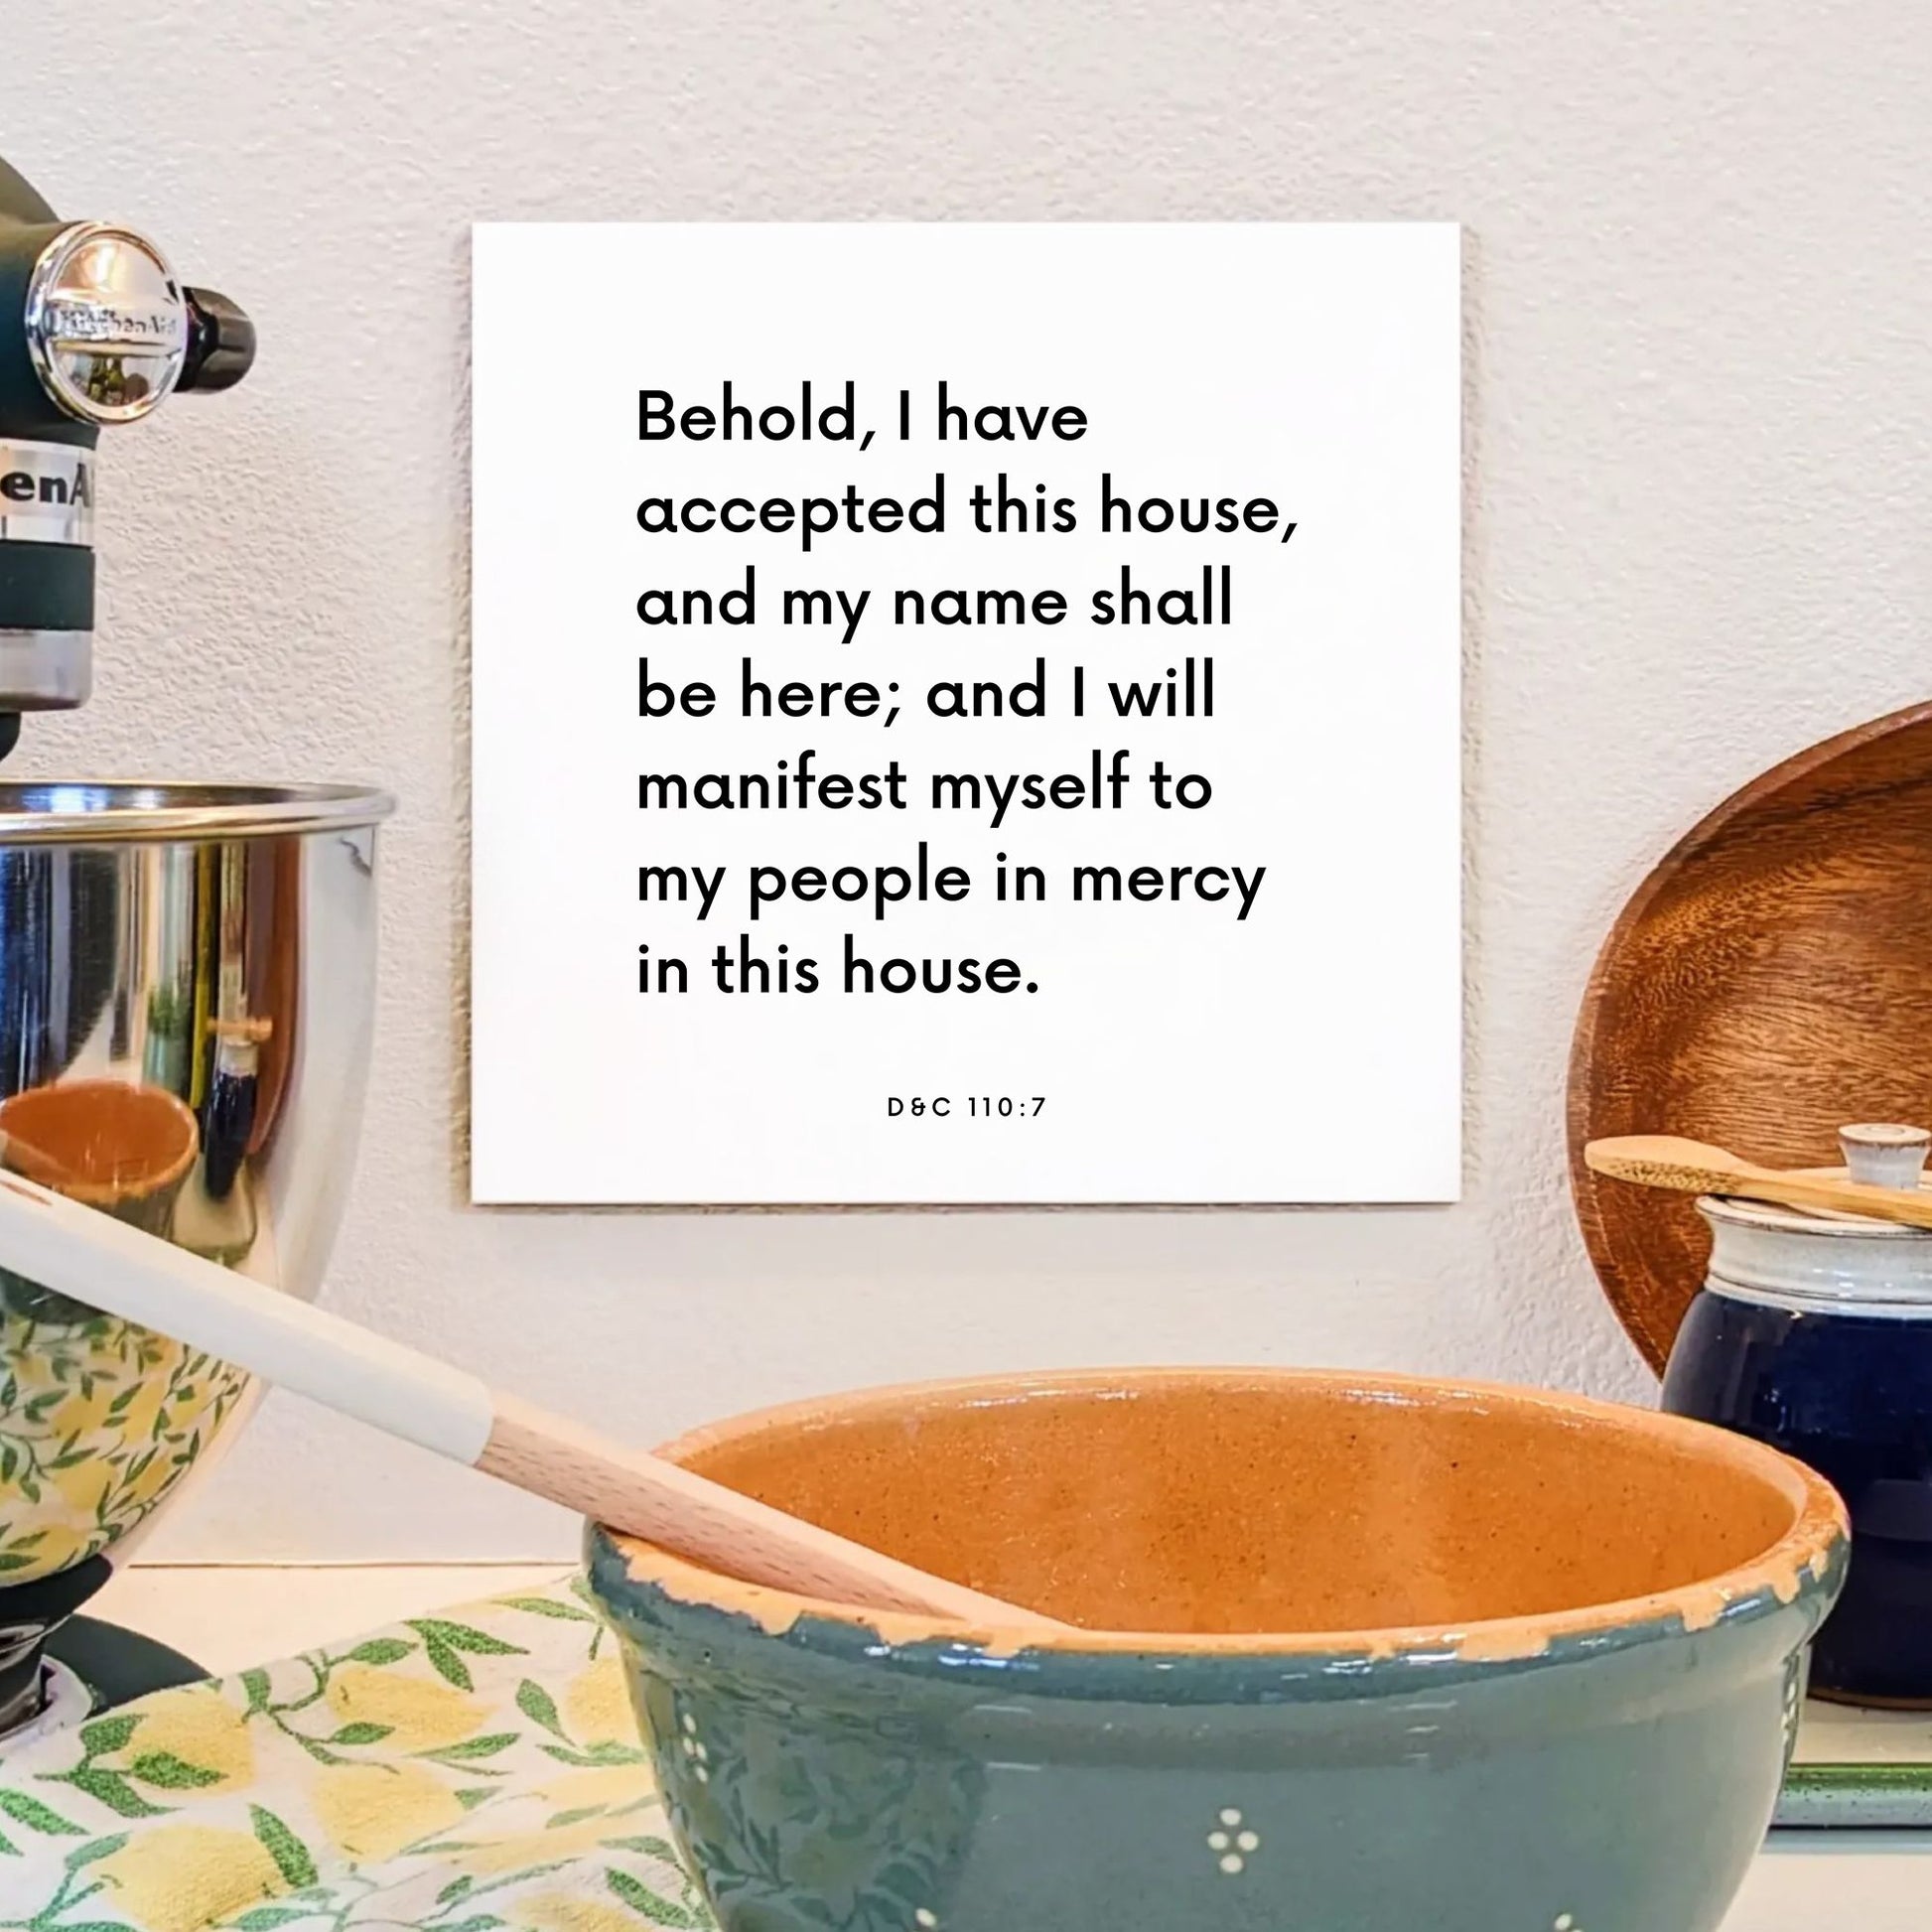 Kitchen mouting of the scripture tile for D&C 110:7 - "I have accepted this house, and my name shall be here"